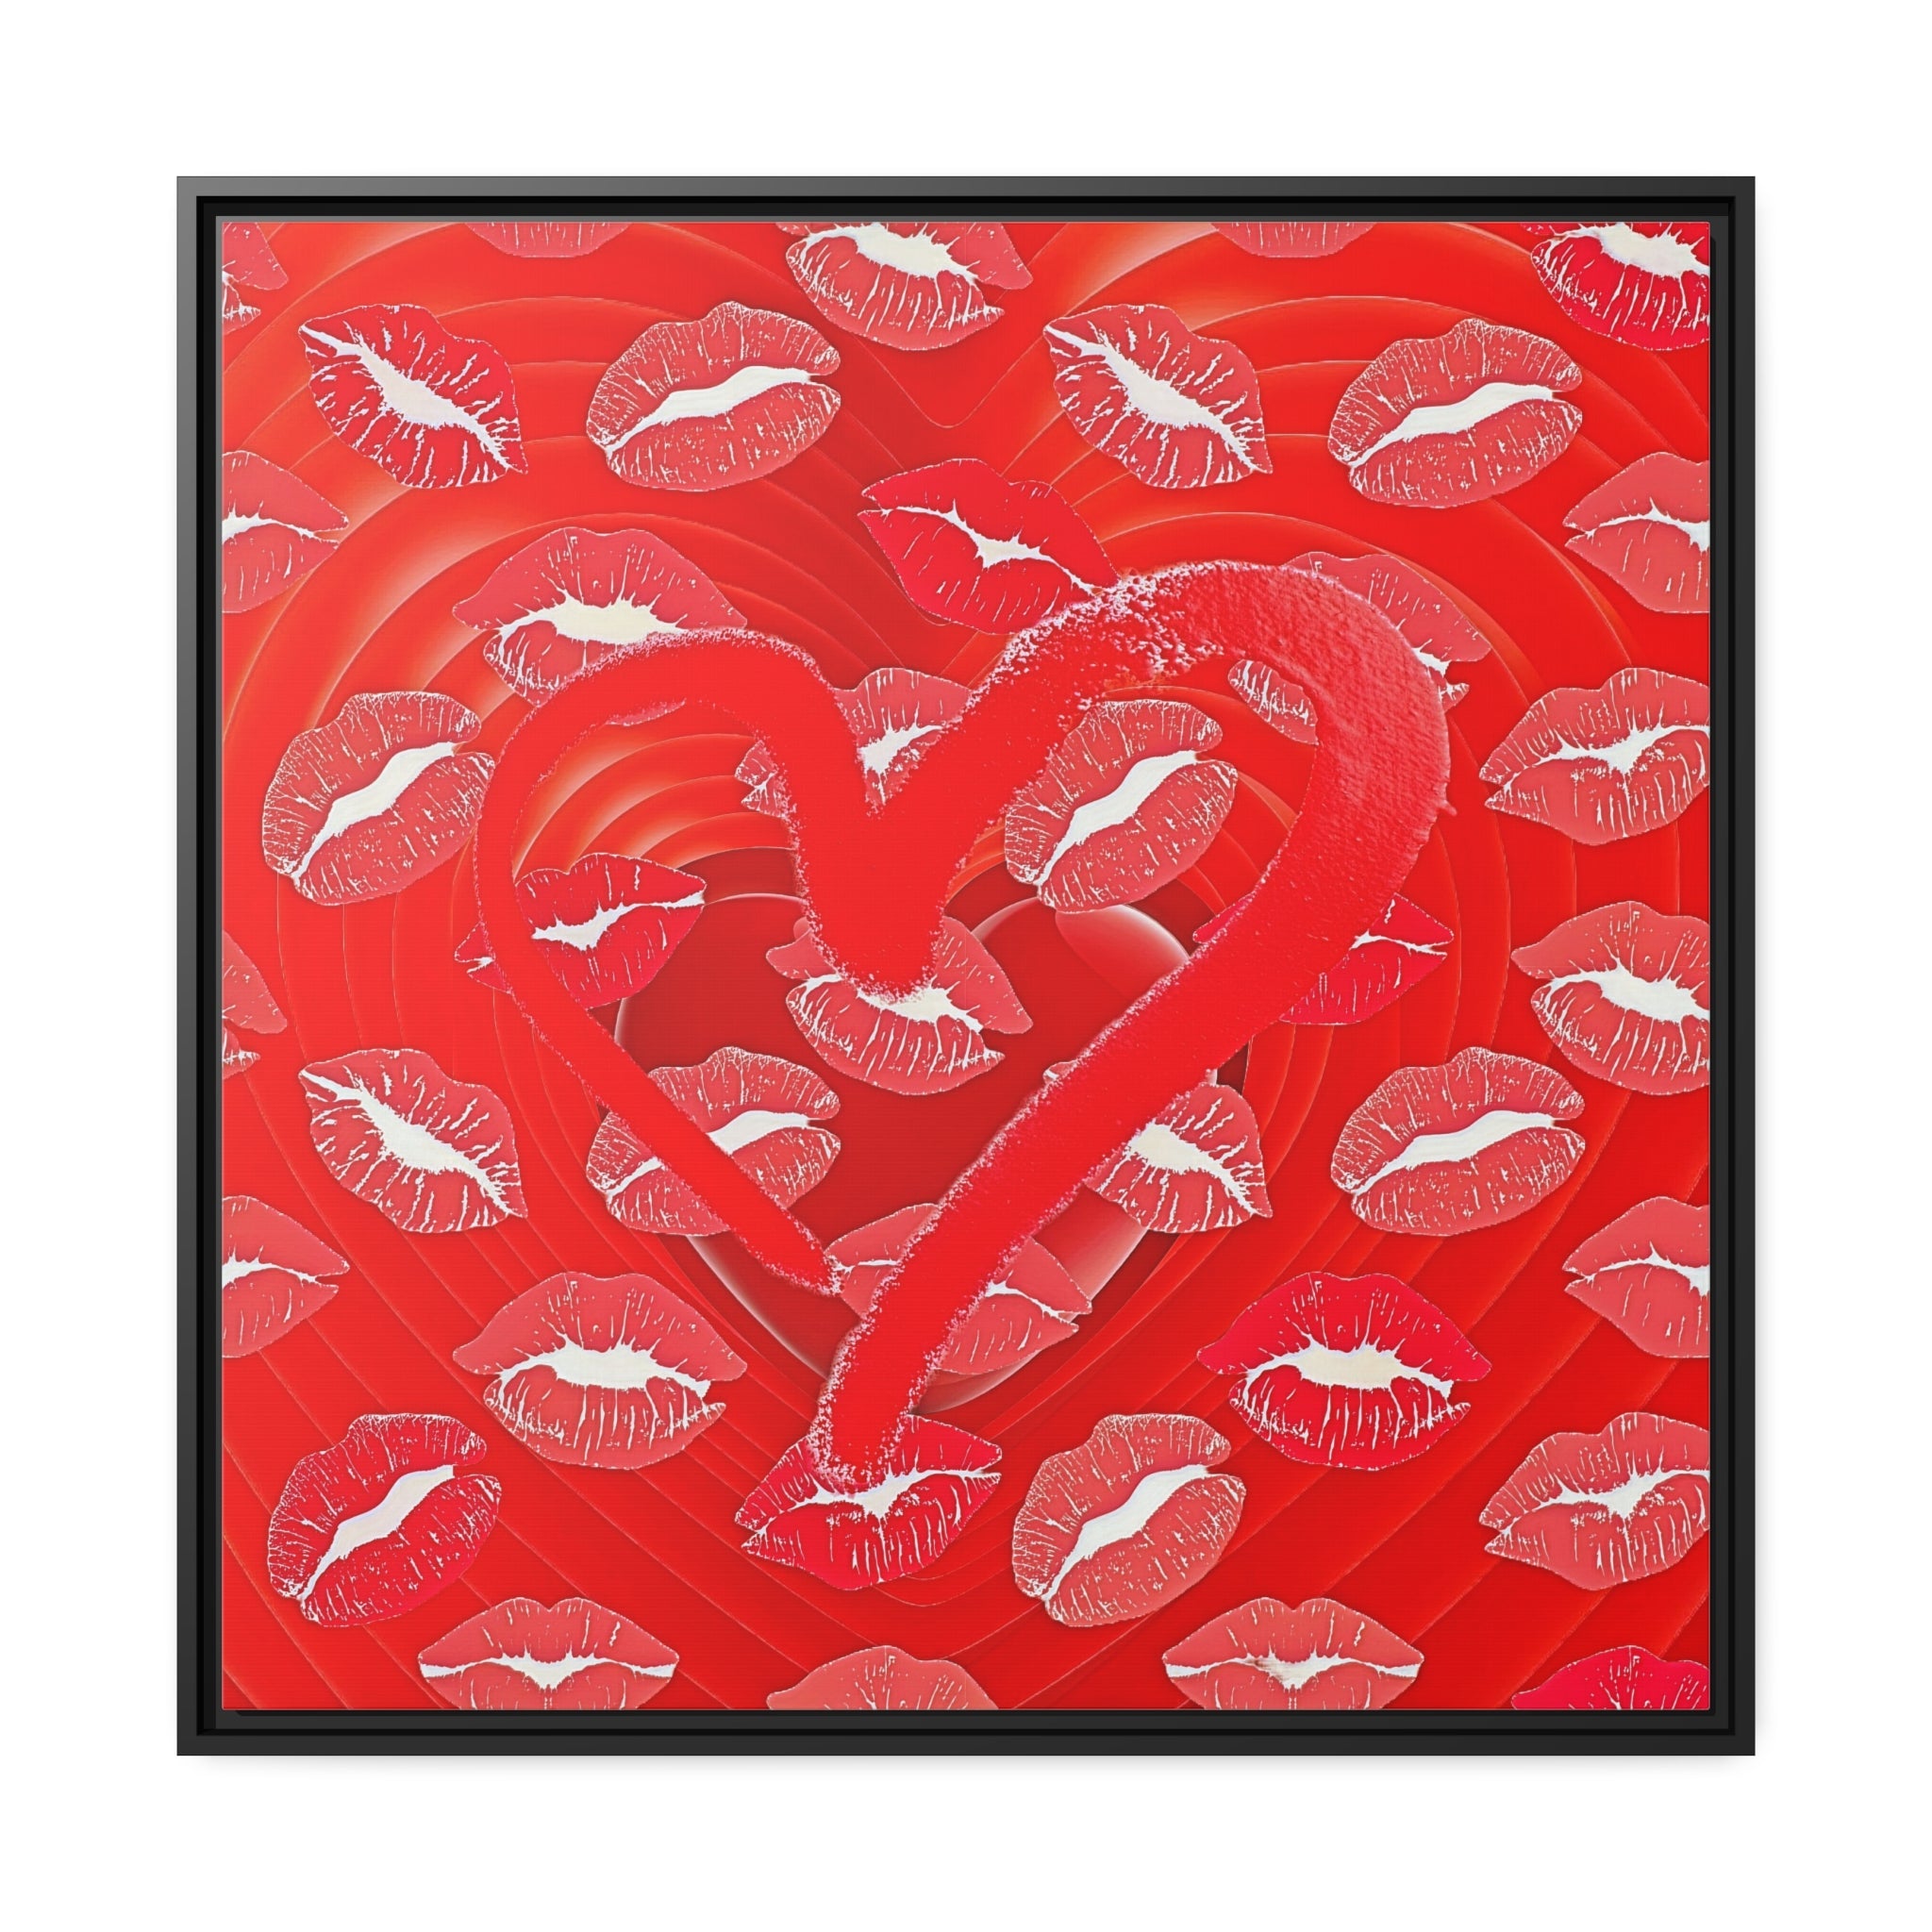 Wall Art LOVE LOTS of KISSES Canvas Print Painting Original Giclee 32X32 + Frame Love Nice Beauty Fun Design Fit House Home Office Gift Ready Hang Rooms